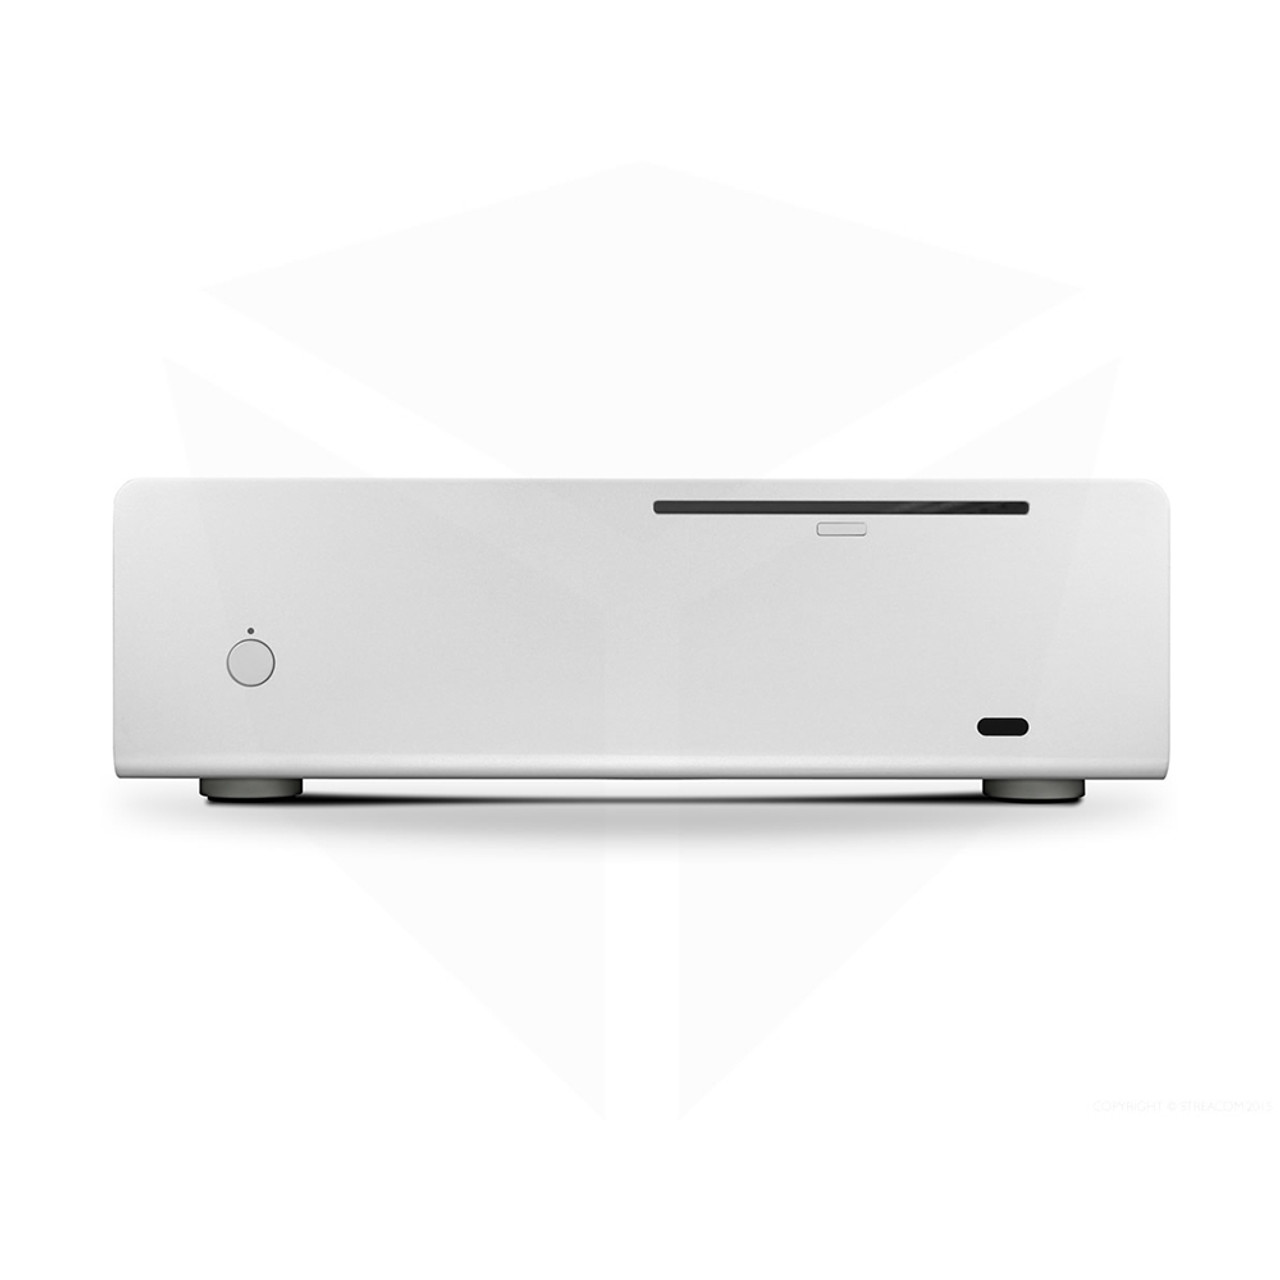 Streacom ST-FC9S ALPHA OPT FC9 ALPHA Fanless Chassis Silver, Extruded Aluminium, with Optical slot